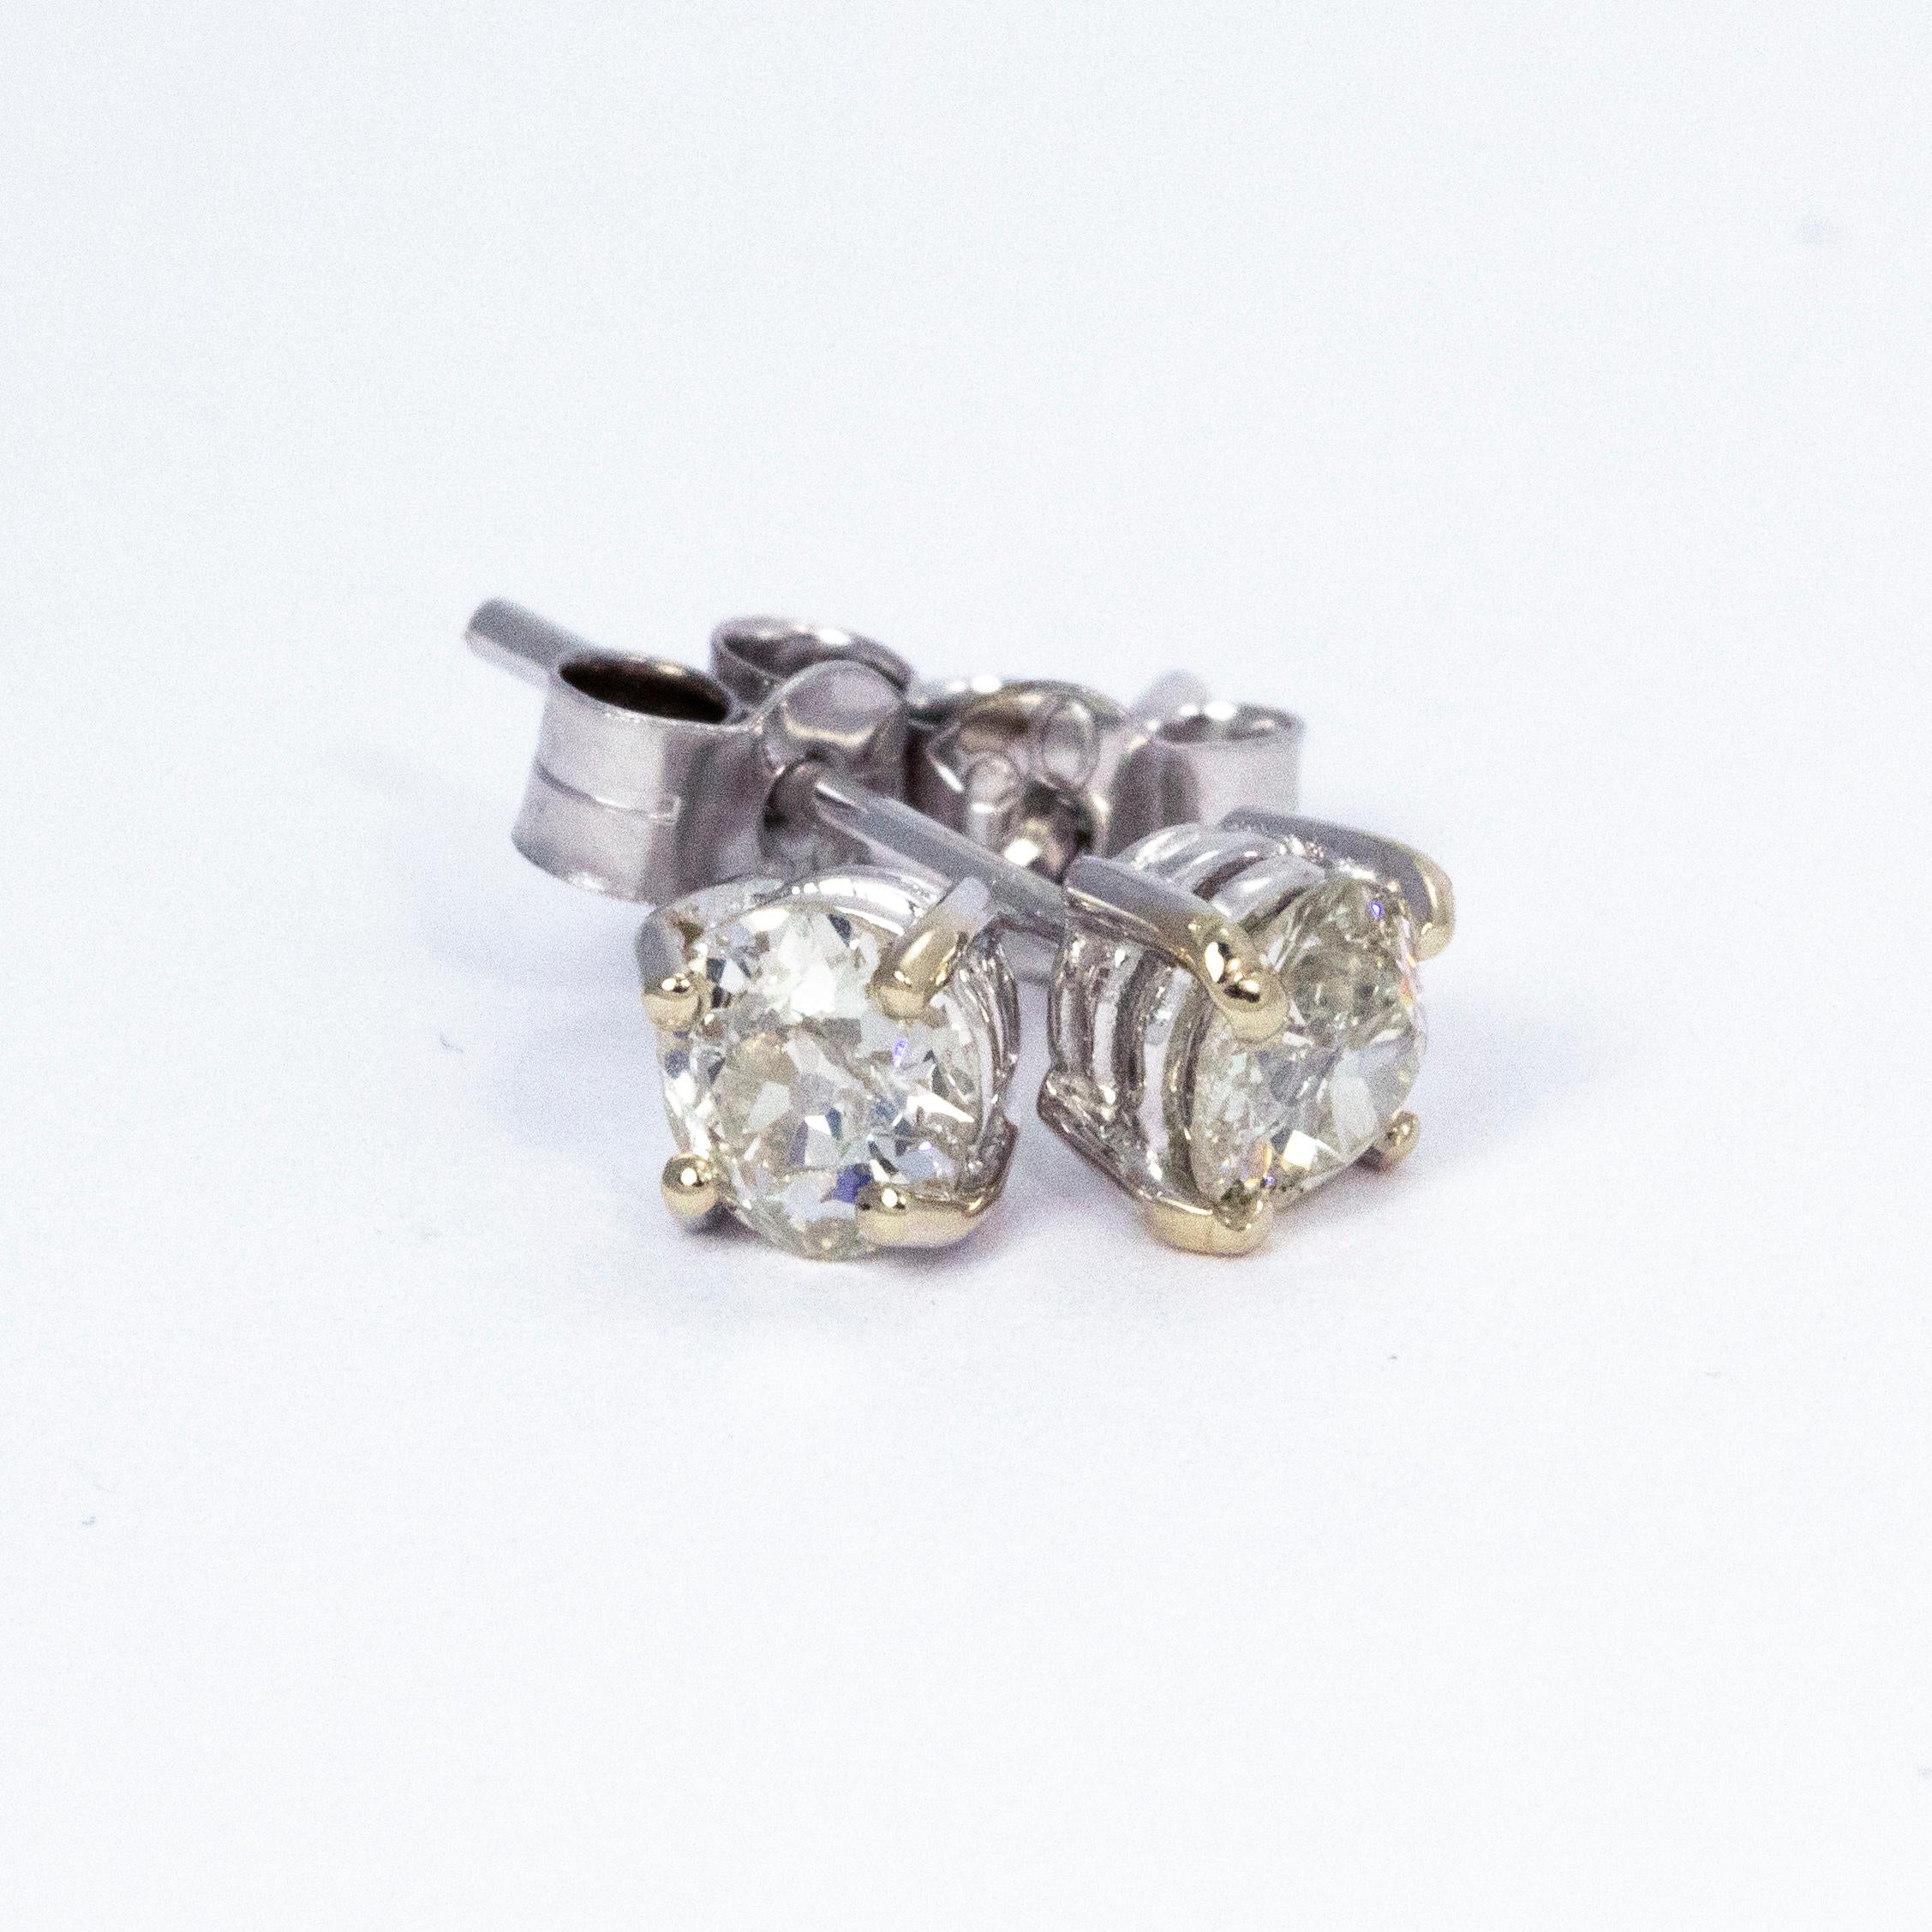 Diamond Stud Earrings 0.70 Total Carat Weight Set in 18 Carat White Gold In Good Condition For Sale In Chipping Campden, GB